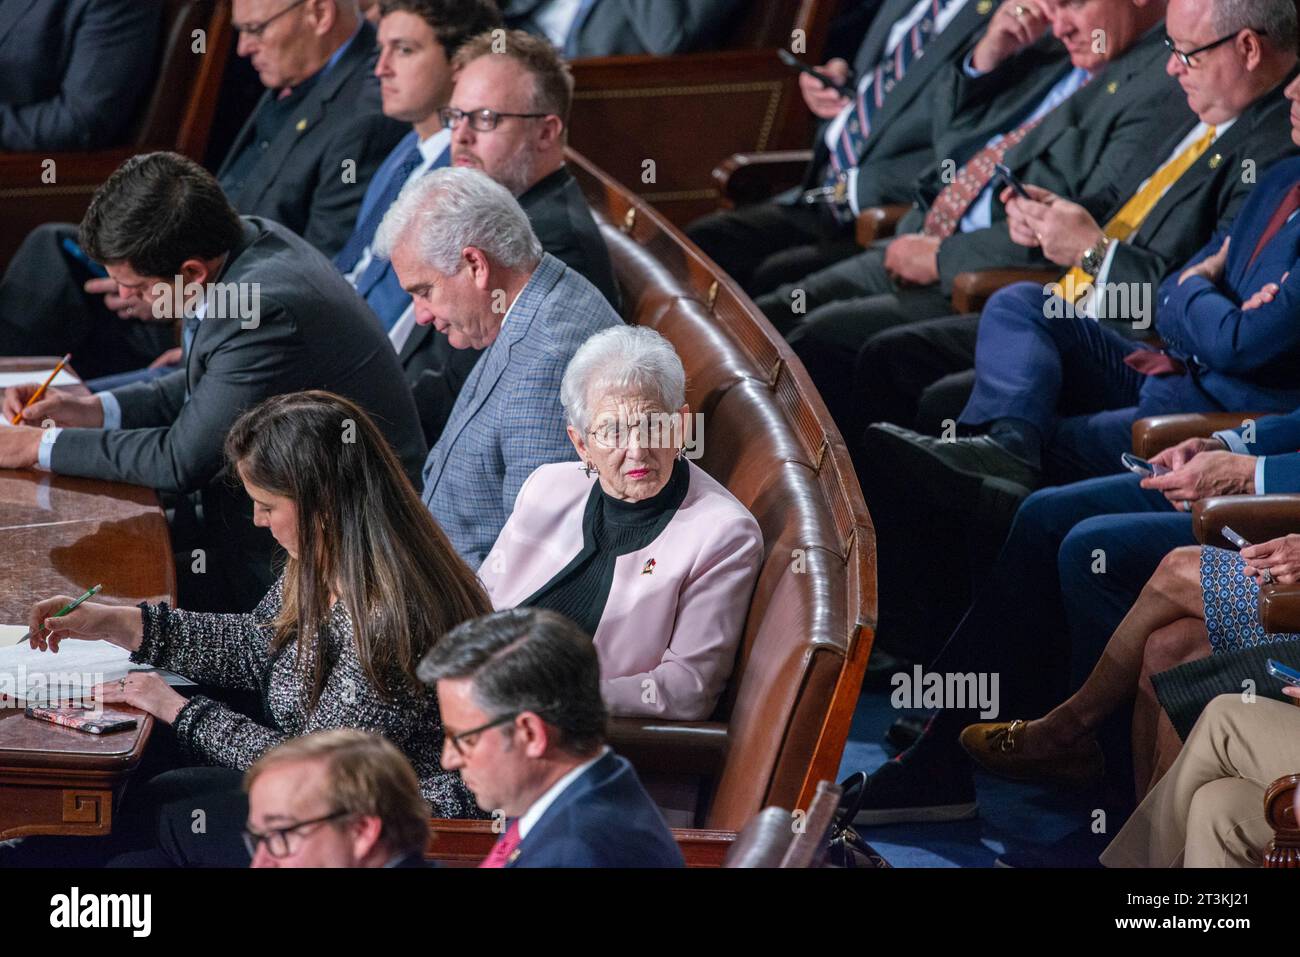 Washington, DC, USA. 25/10/2023, United States Representative Virginia Foxx (Republican of North Carolina) in the House Chamber after United States Representative Mike Johnson (Republican of Louisiana) is elected Speaker of the House Wednesday, October 25, 2023 in Washington, DC, USA. Foxx recently received media attention after “booing” a reporter who asked Johnson about his stance on overturning the 2020 election shortly after Johnson was named the GOP nominee. The party first nominated United States House Majority Leader Steve Scalise (Republican of Louisiana), who dropped out shortly after Stock Photo